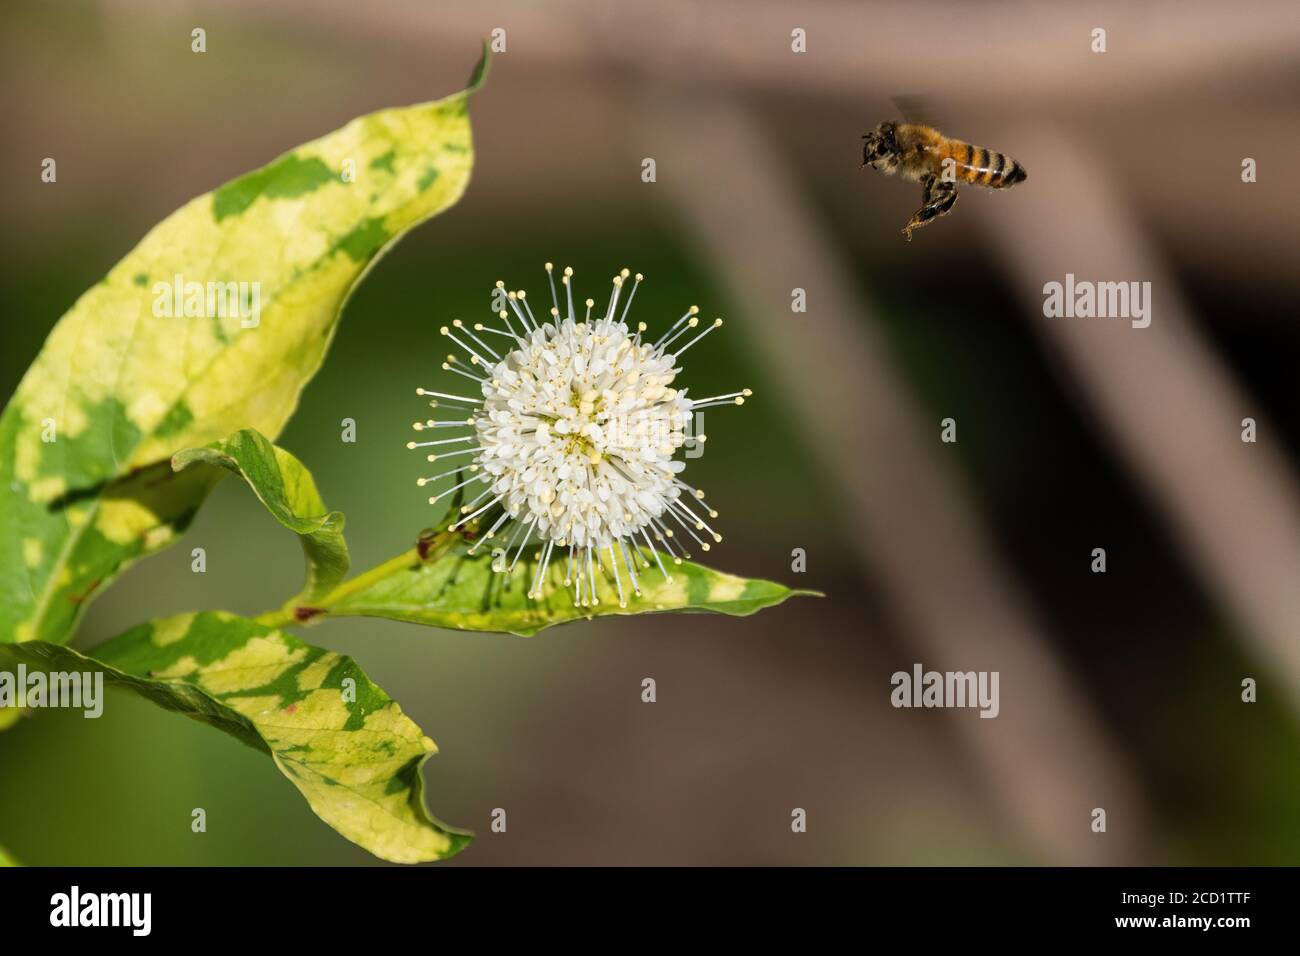 Honeybee hovering near the spiked, white flower of a Common Buttonbush as it flies from plant to plant gathering nectar and spreading pollen. Stock Photo